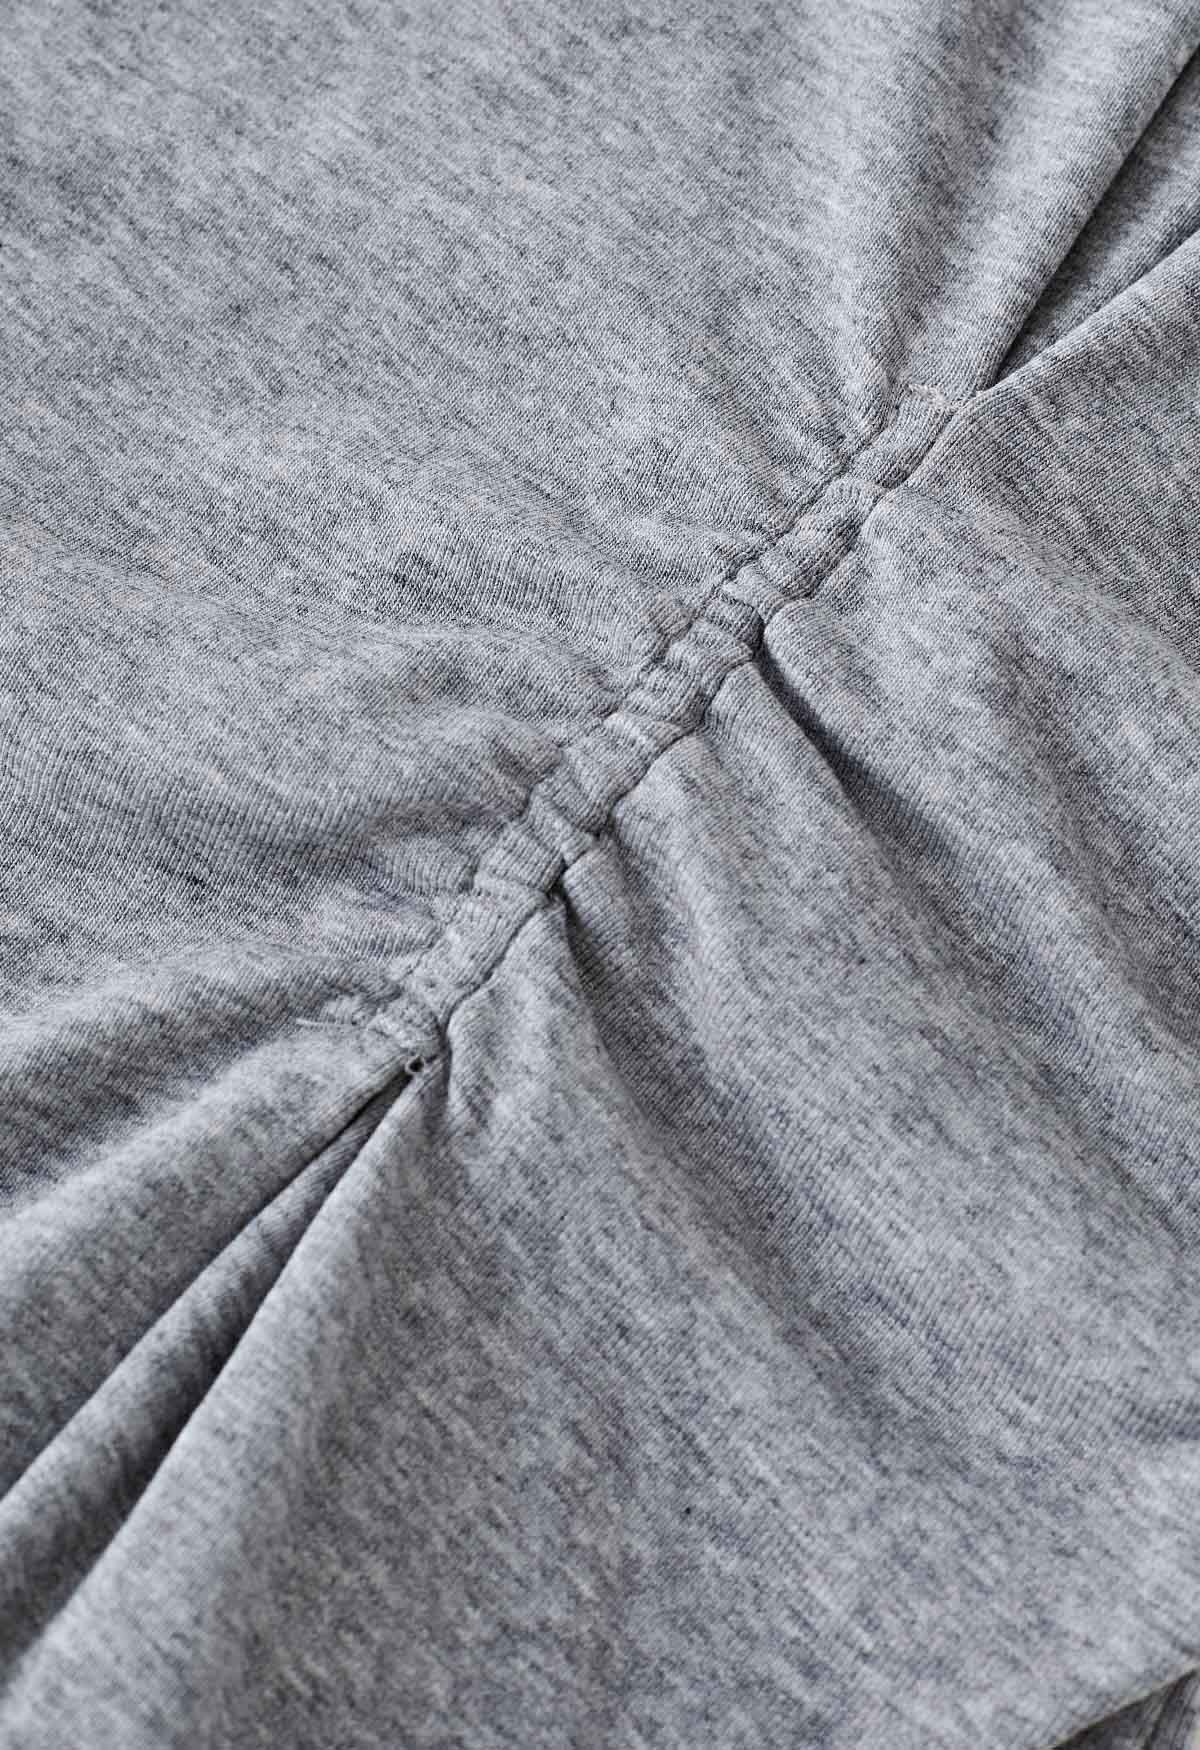 Gathering Ruched Crew Neck T-Shirt in Grey